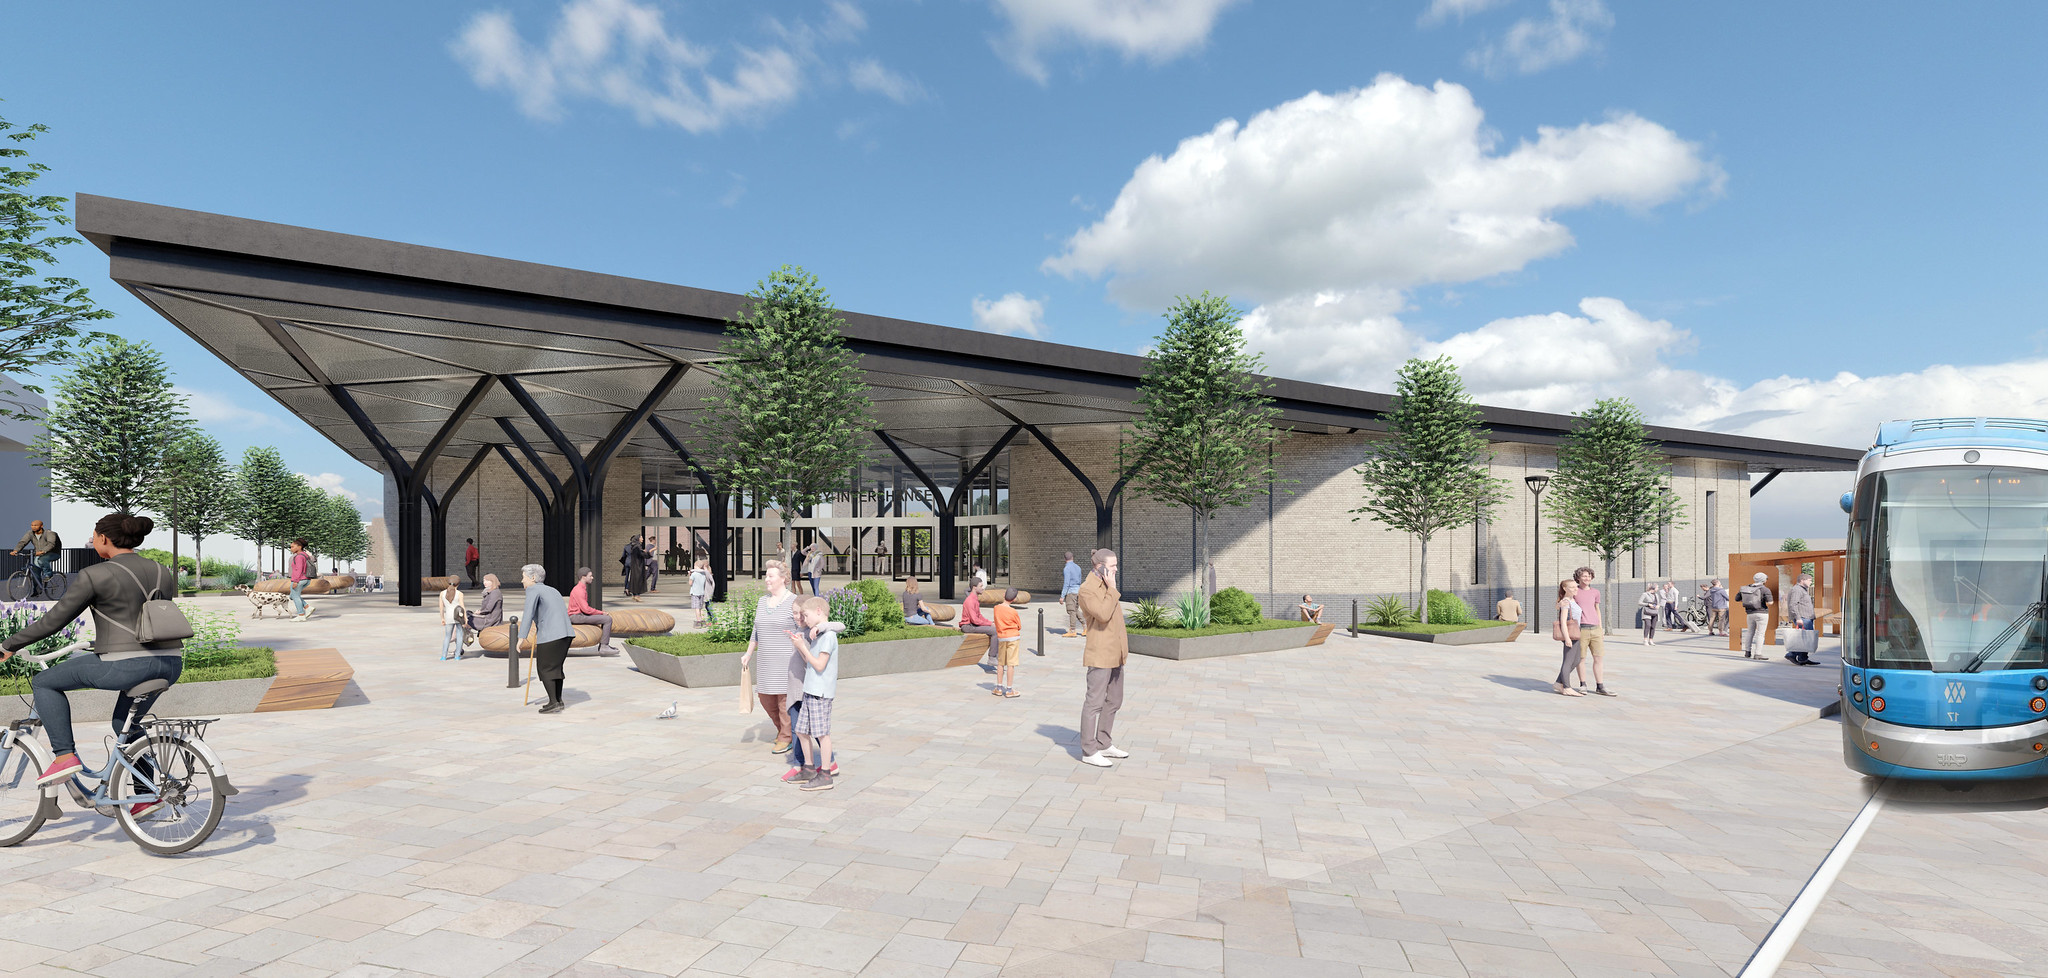 Dudley station due for demolition ready for new interchange